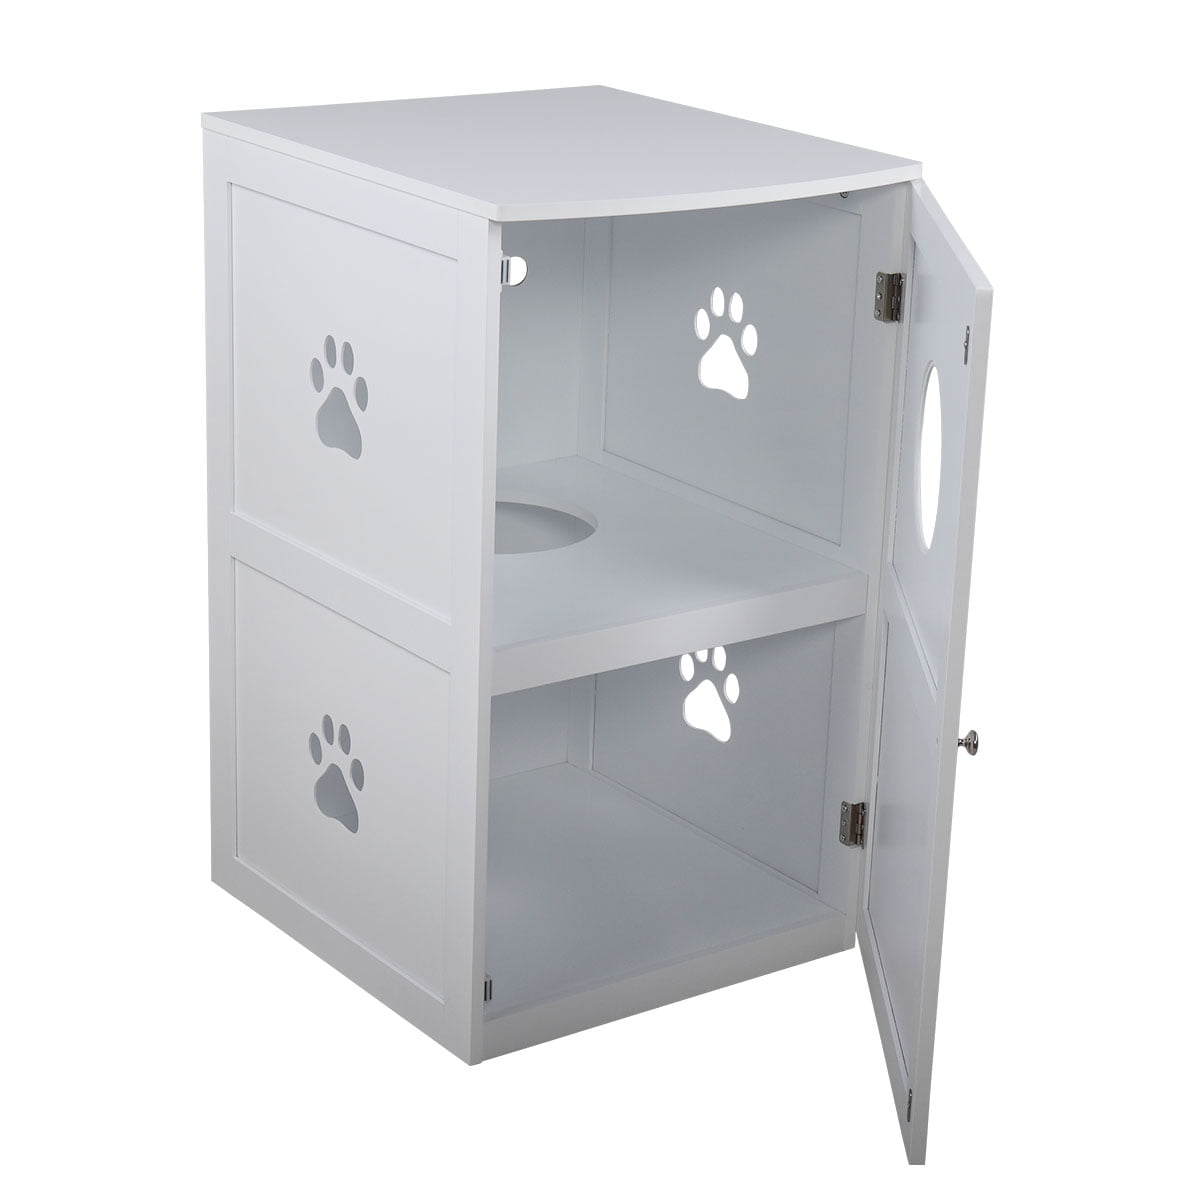 a Round Entrance and Openable Door 2-Tier Functional Wood Cat Washroom Litter Box Cover with Multiple Vents